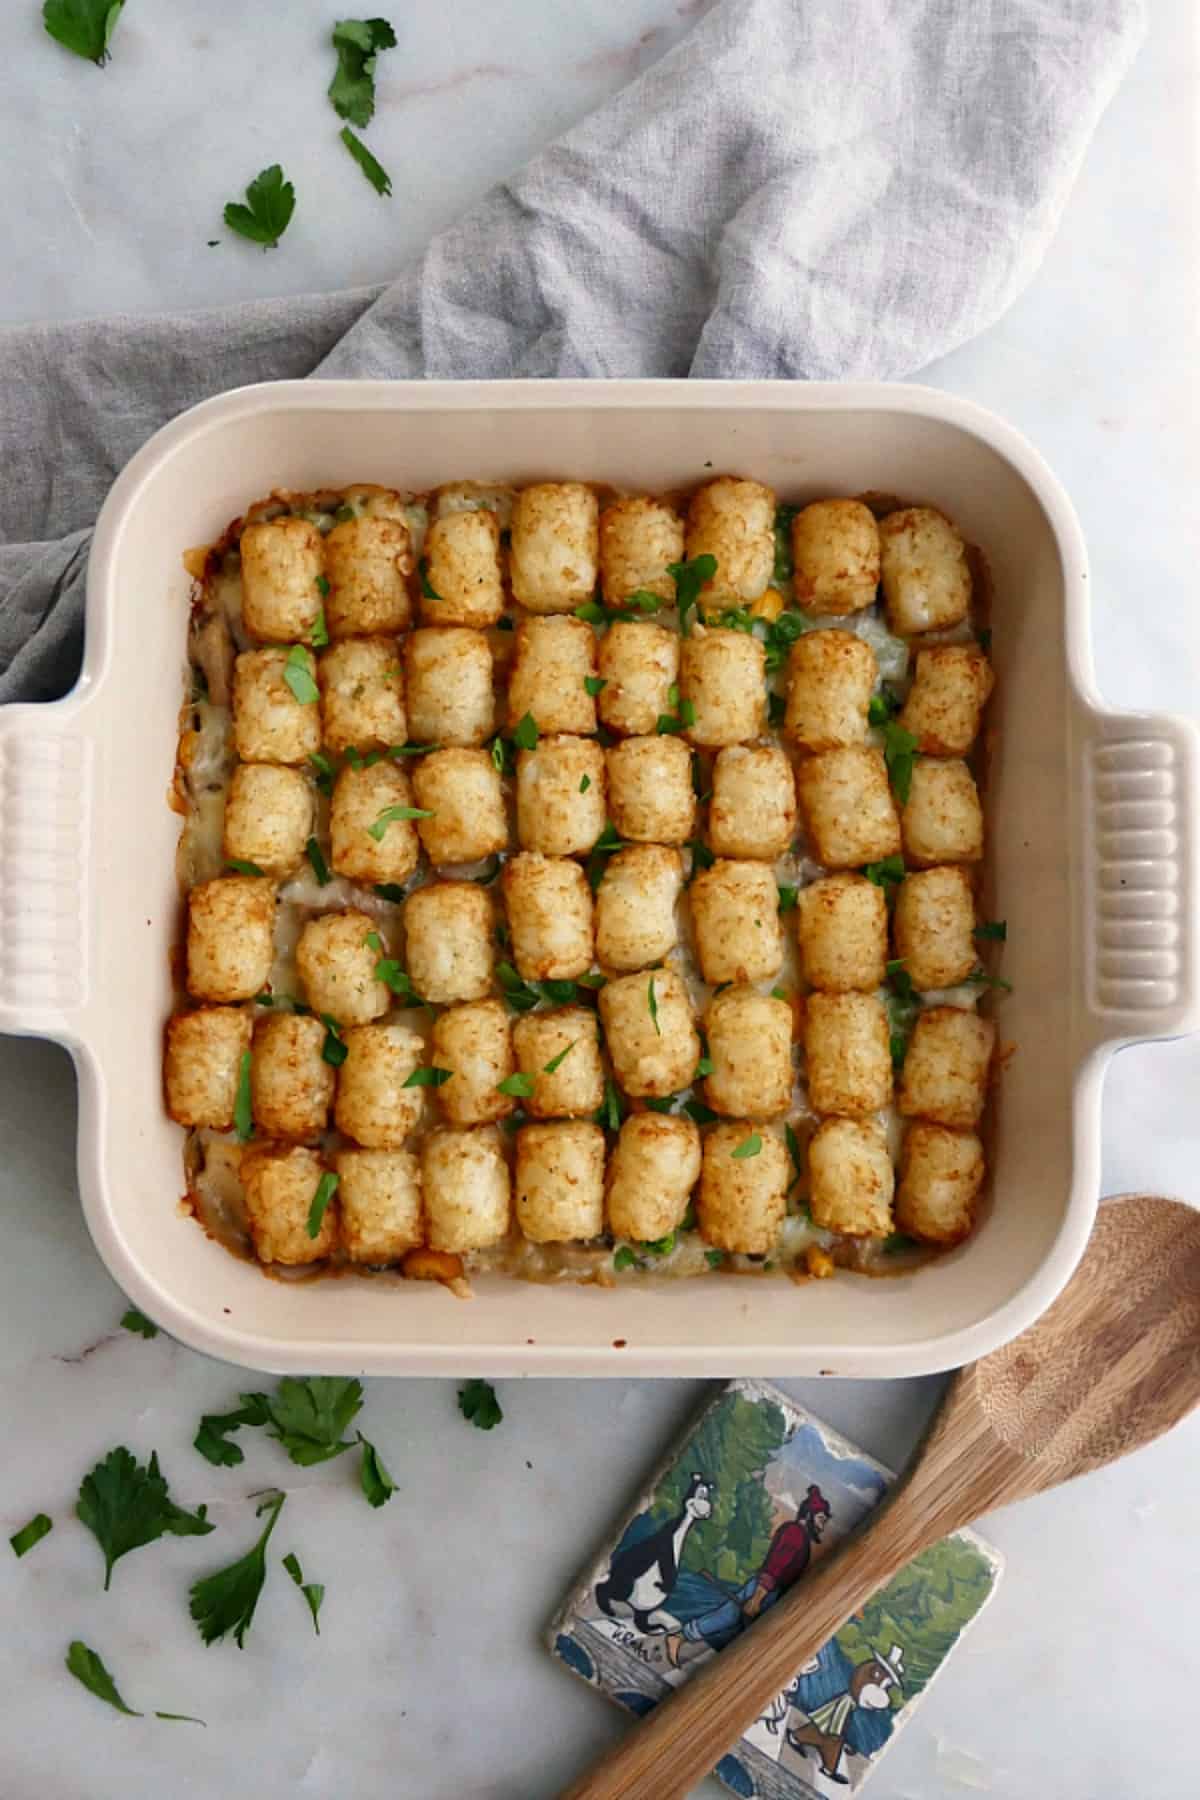 Healthy Tater Tot Casserole With